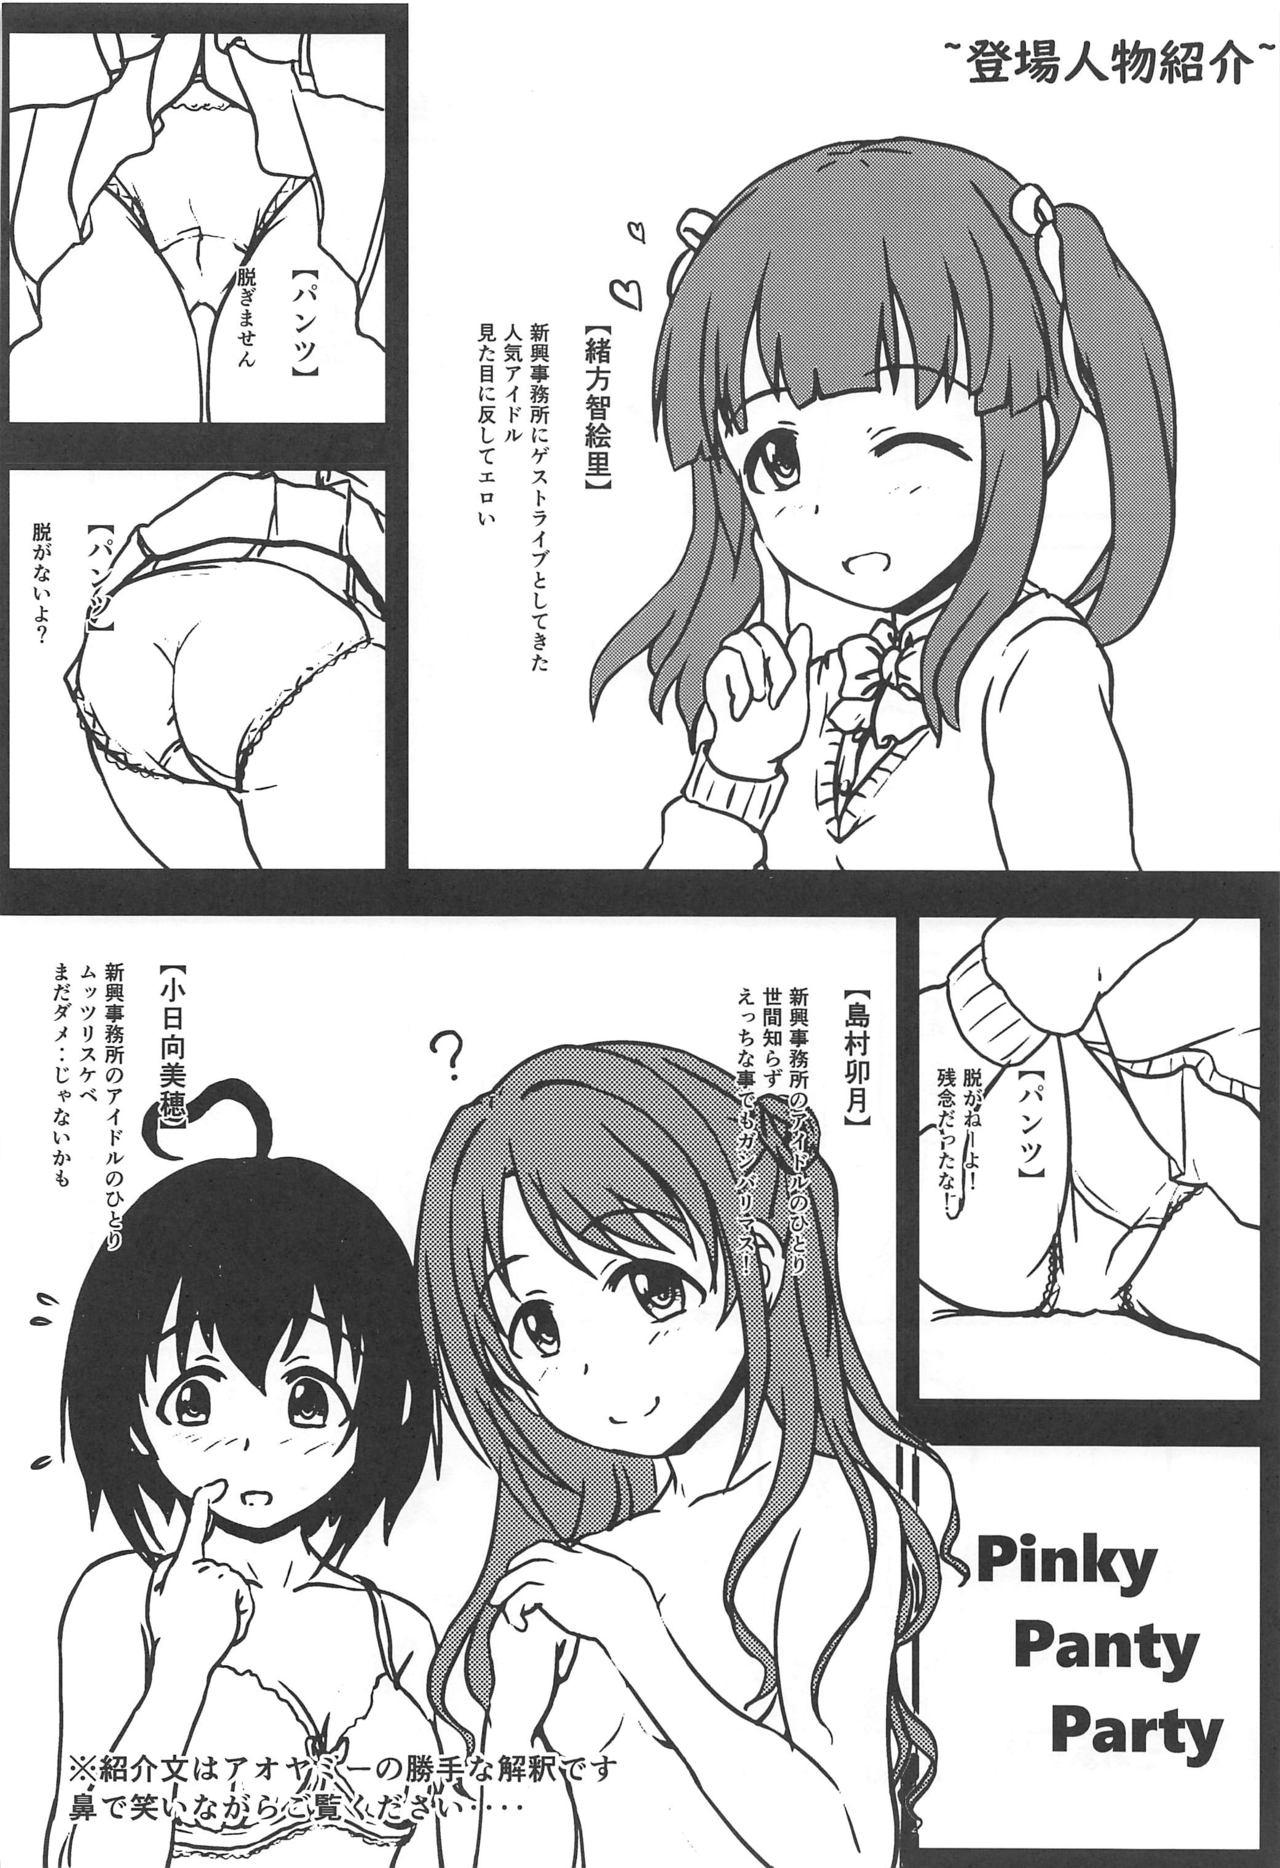 Groupsex Pinky Panty Party - The idolmaster Real Amatuer Porn - Page 3